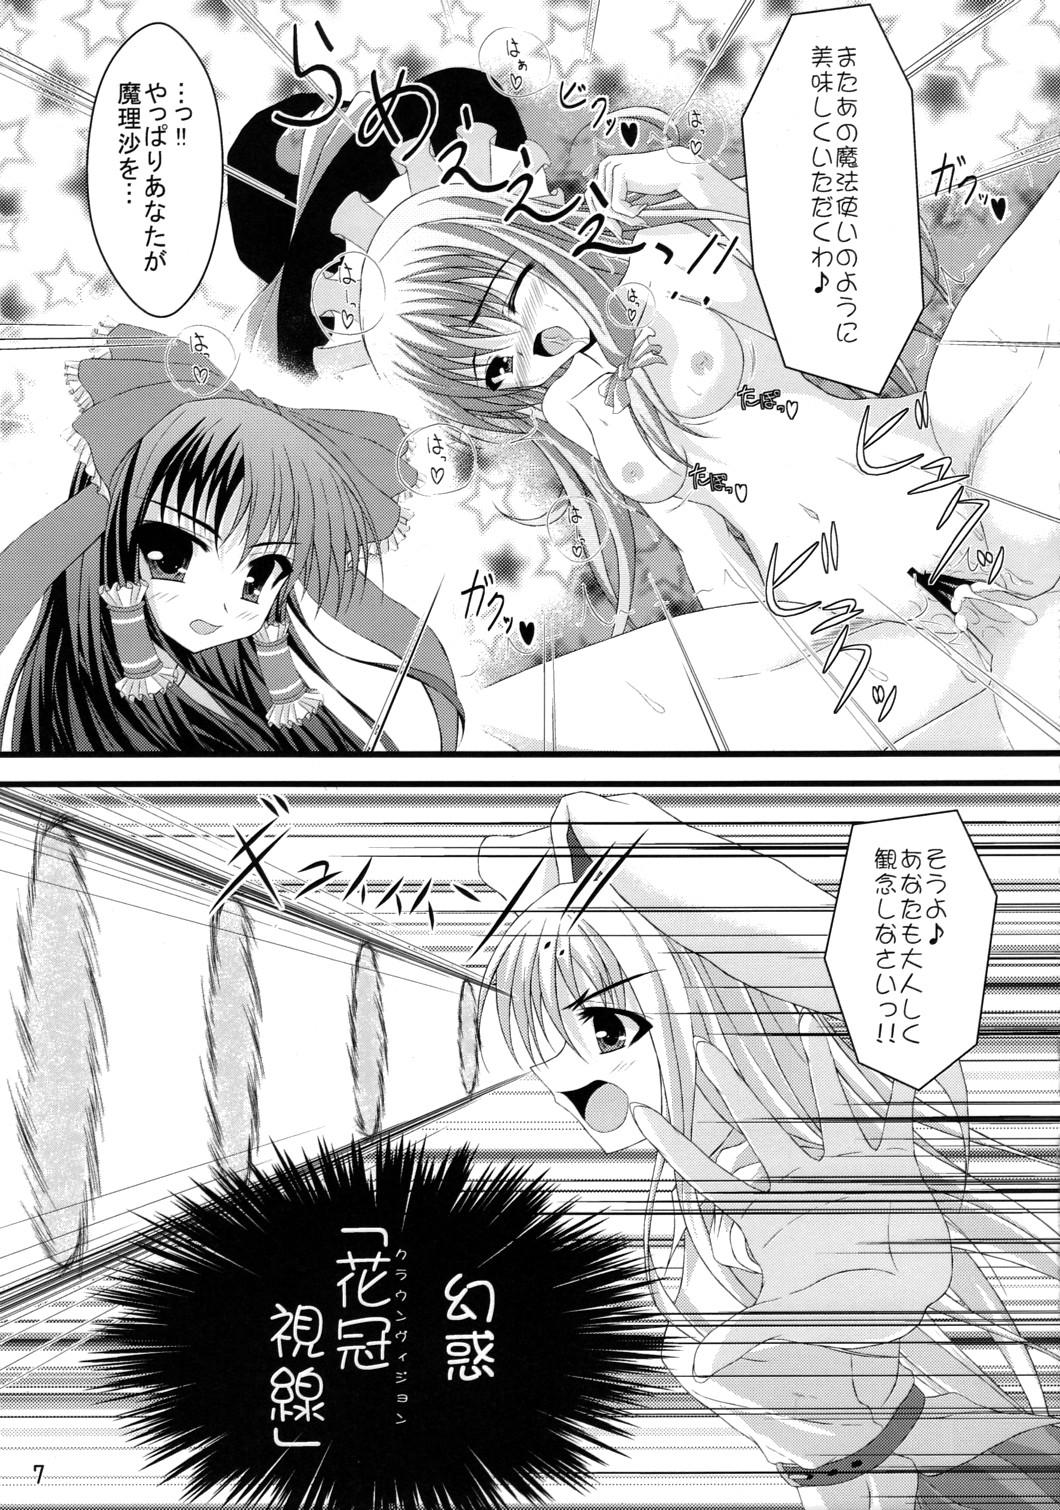 Women Sucking Dick Tele-Mesmerism - Touhou project Ikillitts - Page 6